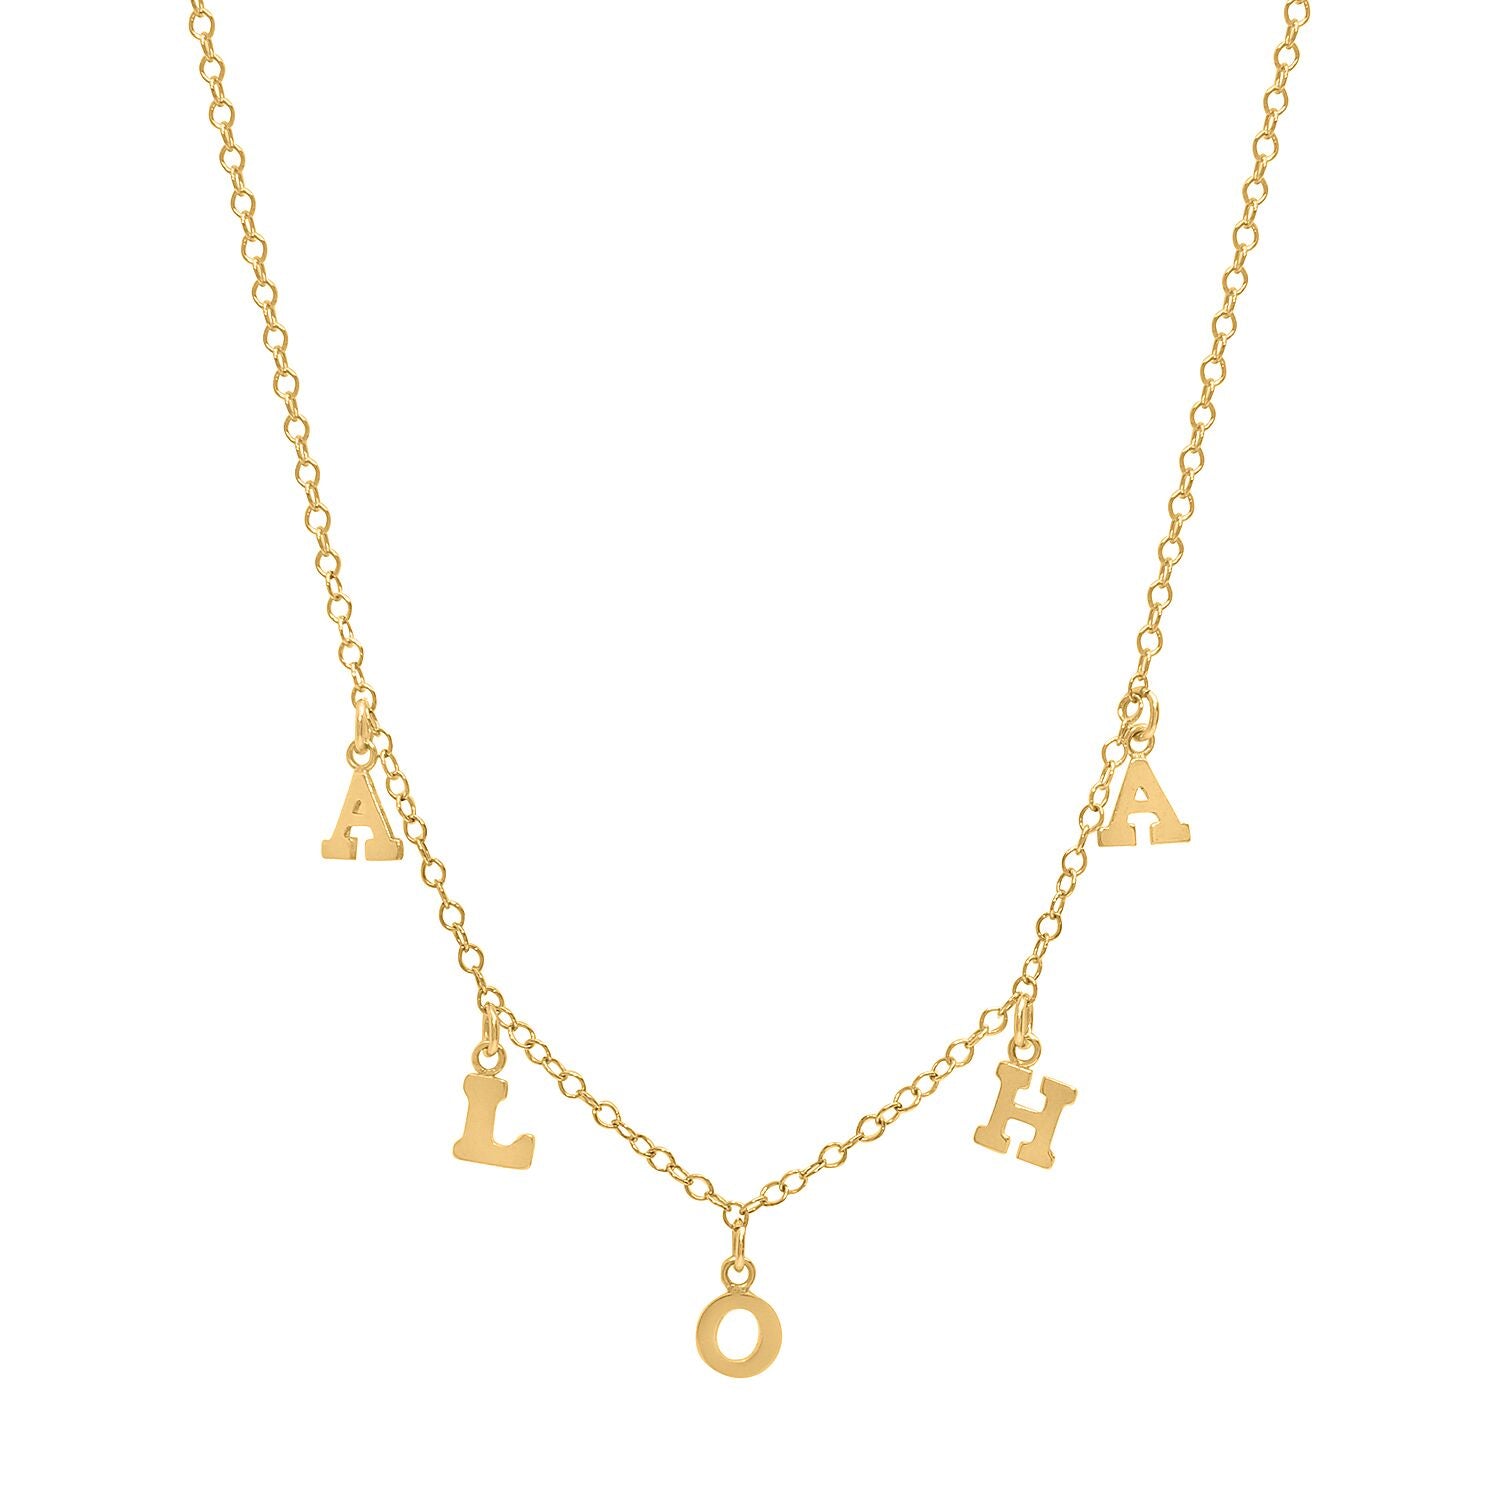 caitlin nicole jewelry hanging initial necklace in 14k gold filled